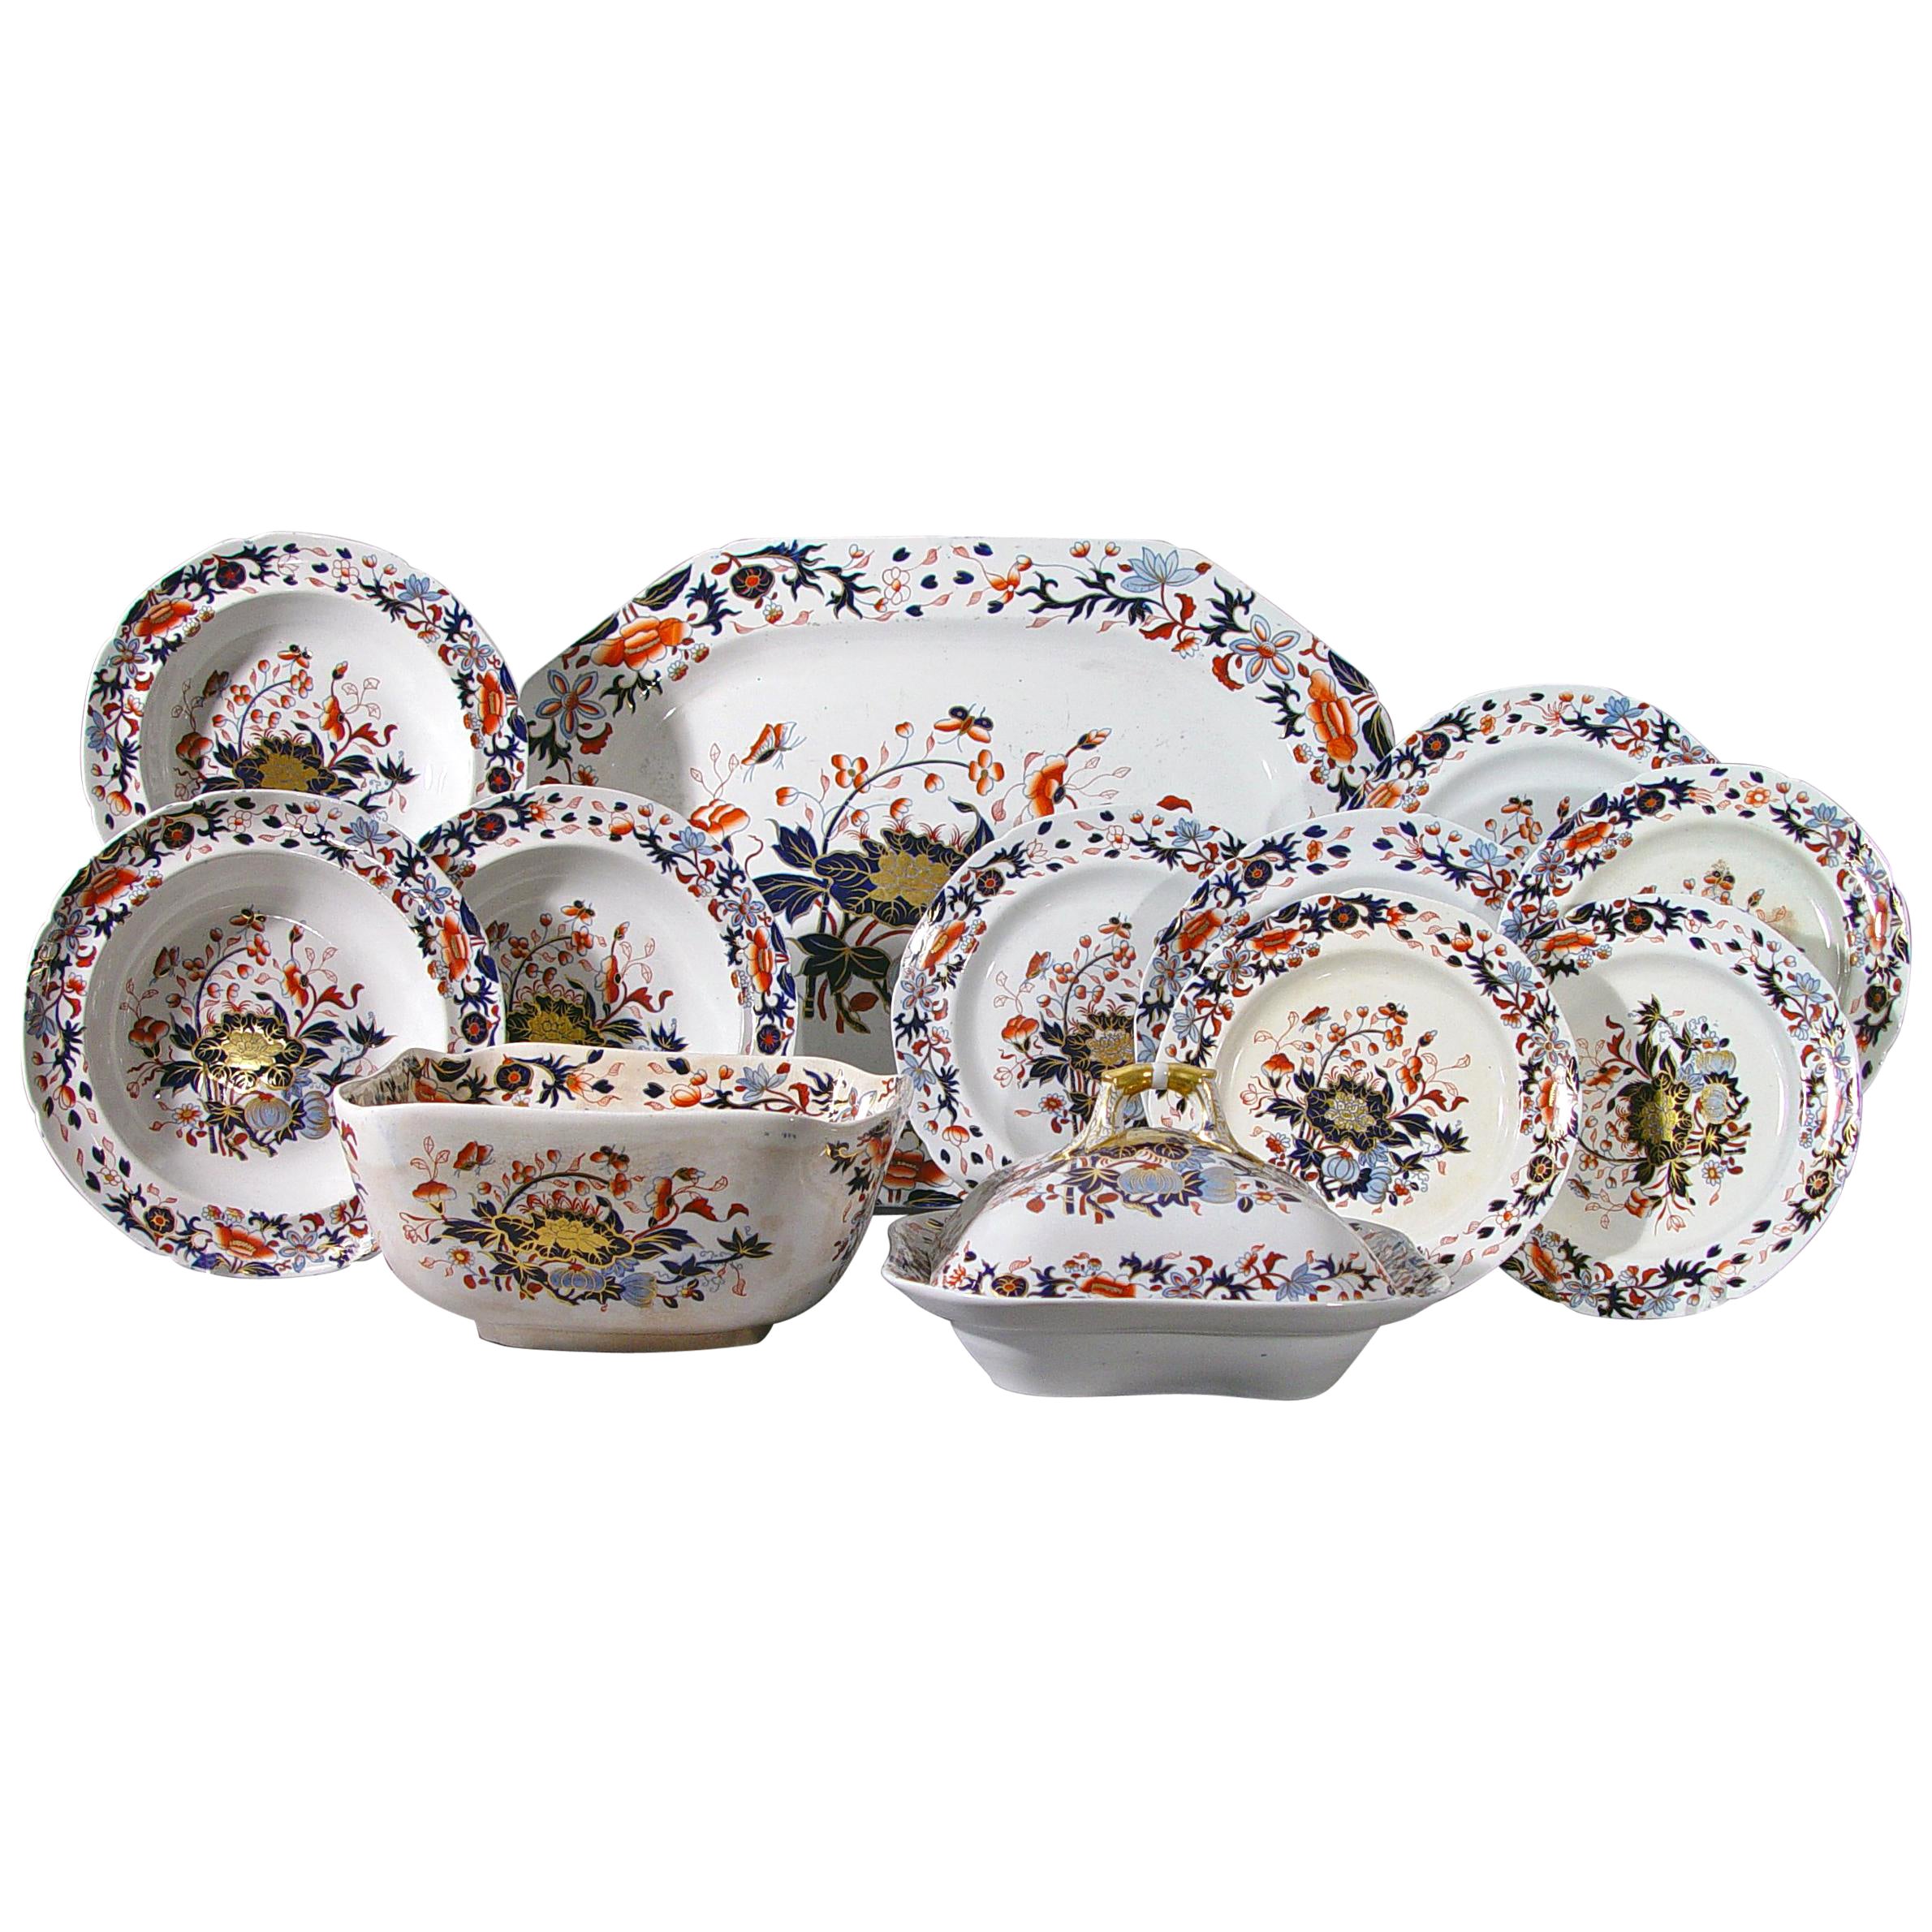 Spode New Stone China Dinner Service Eighty Four Pieces, Pattern #3504 en vente